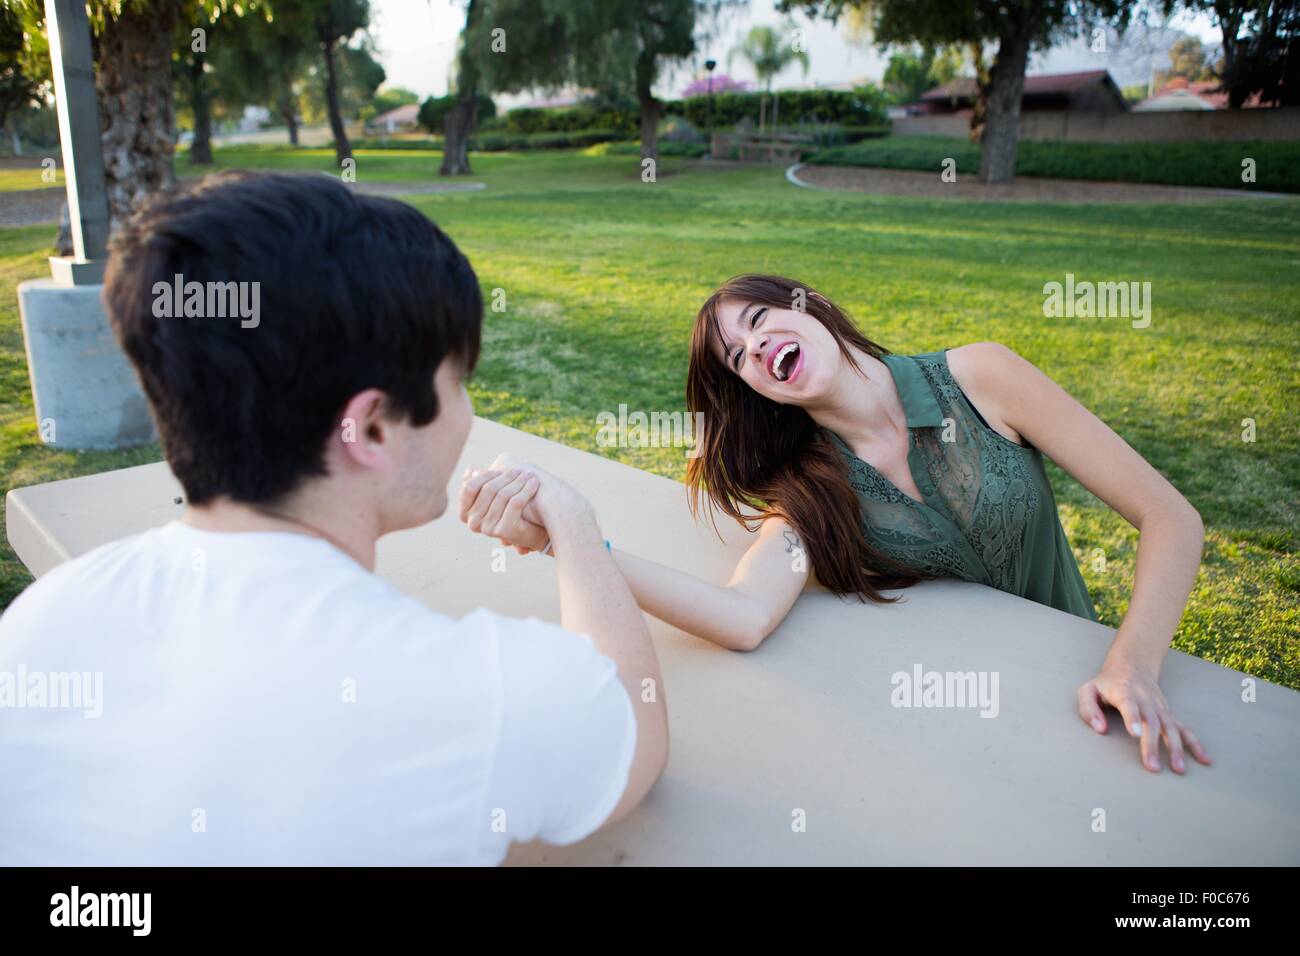 Young couple pretending to arm wrestle at picnic bench in park Stock Photo